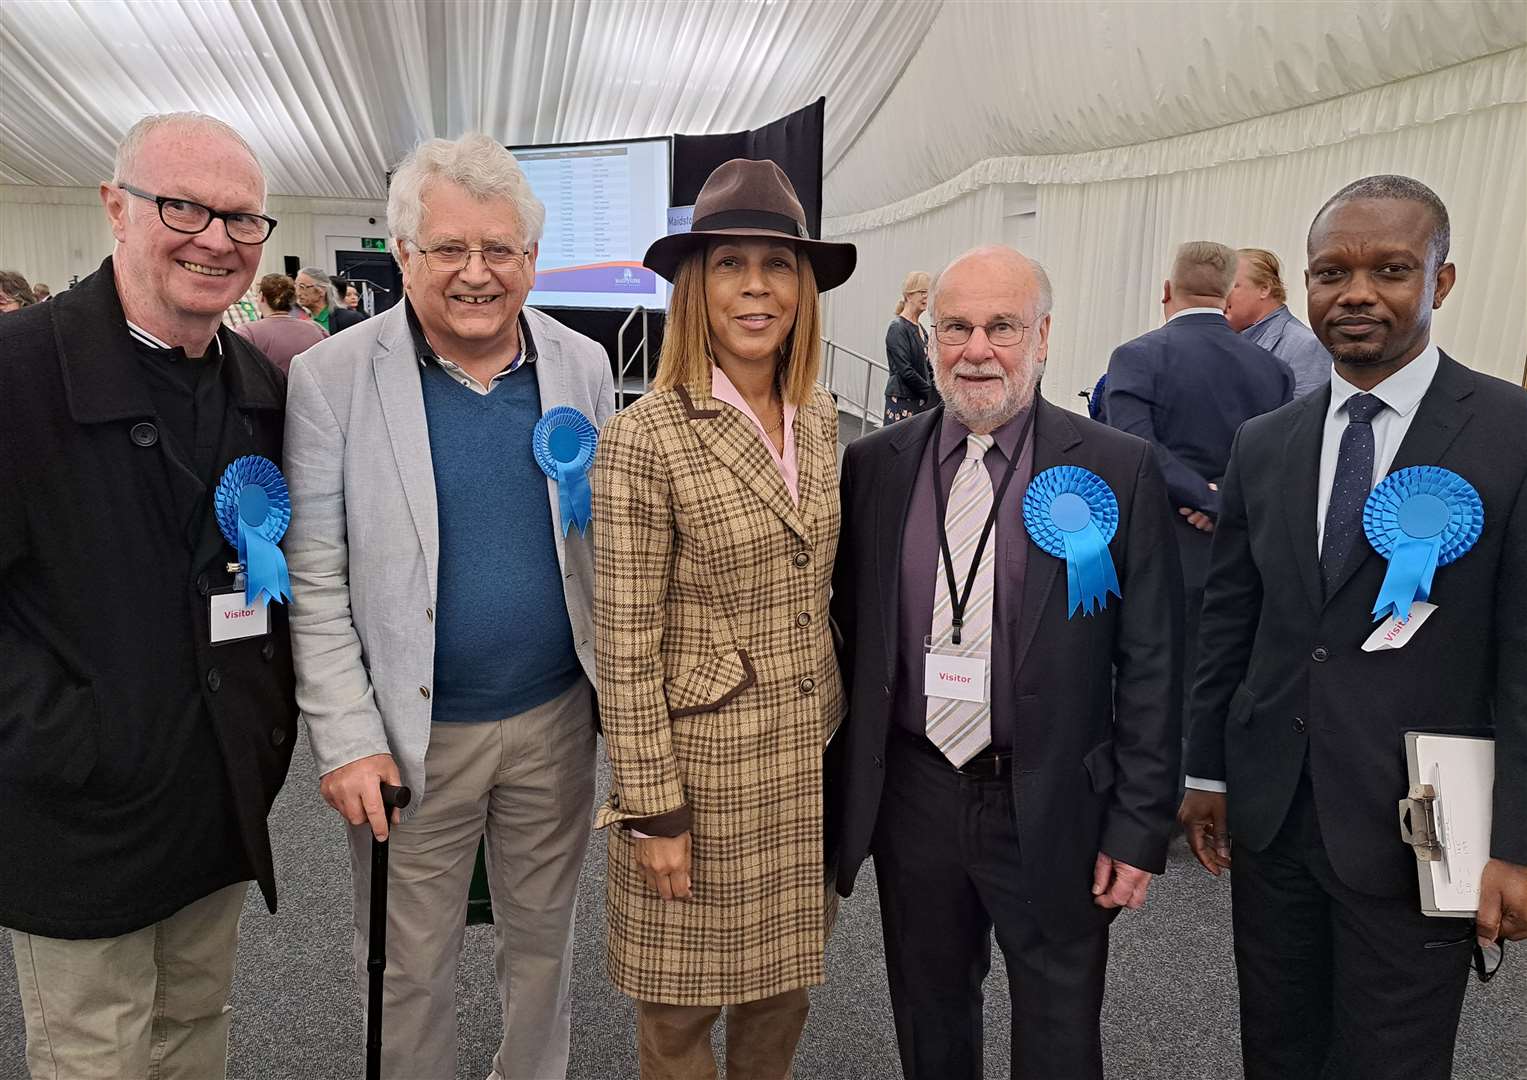 Helen Grant MP was at the count to give support to the Conservatives